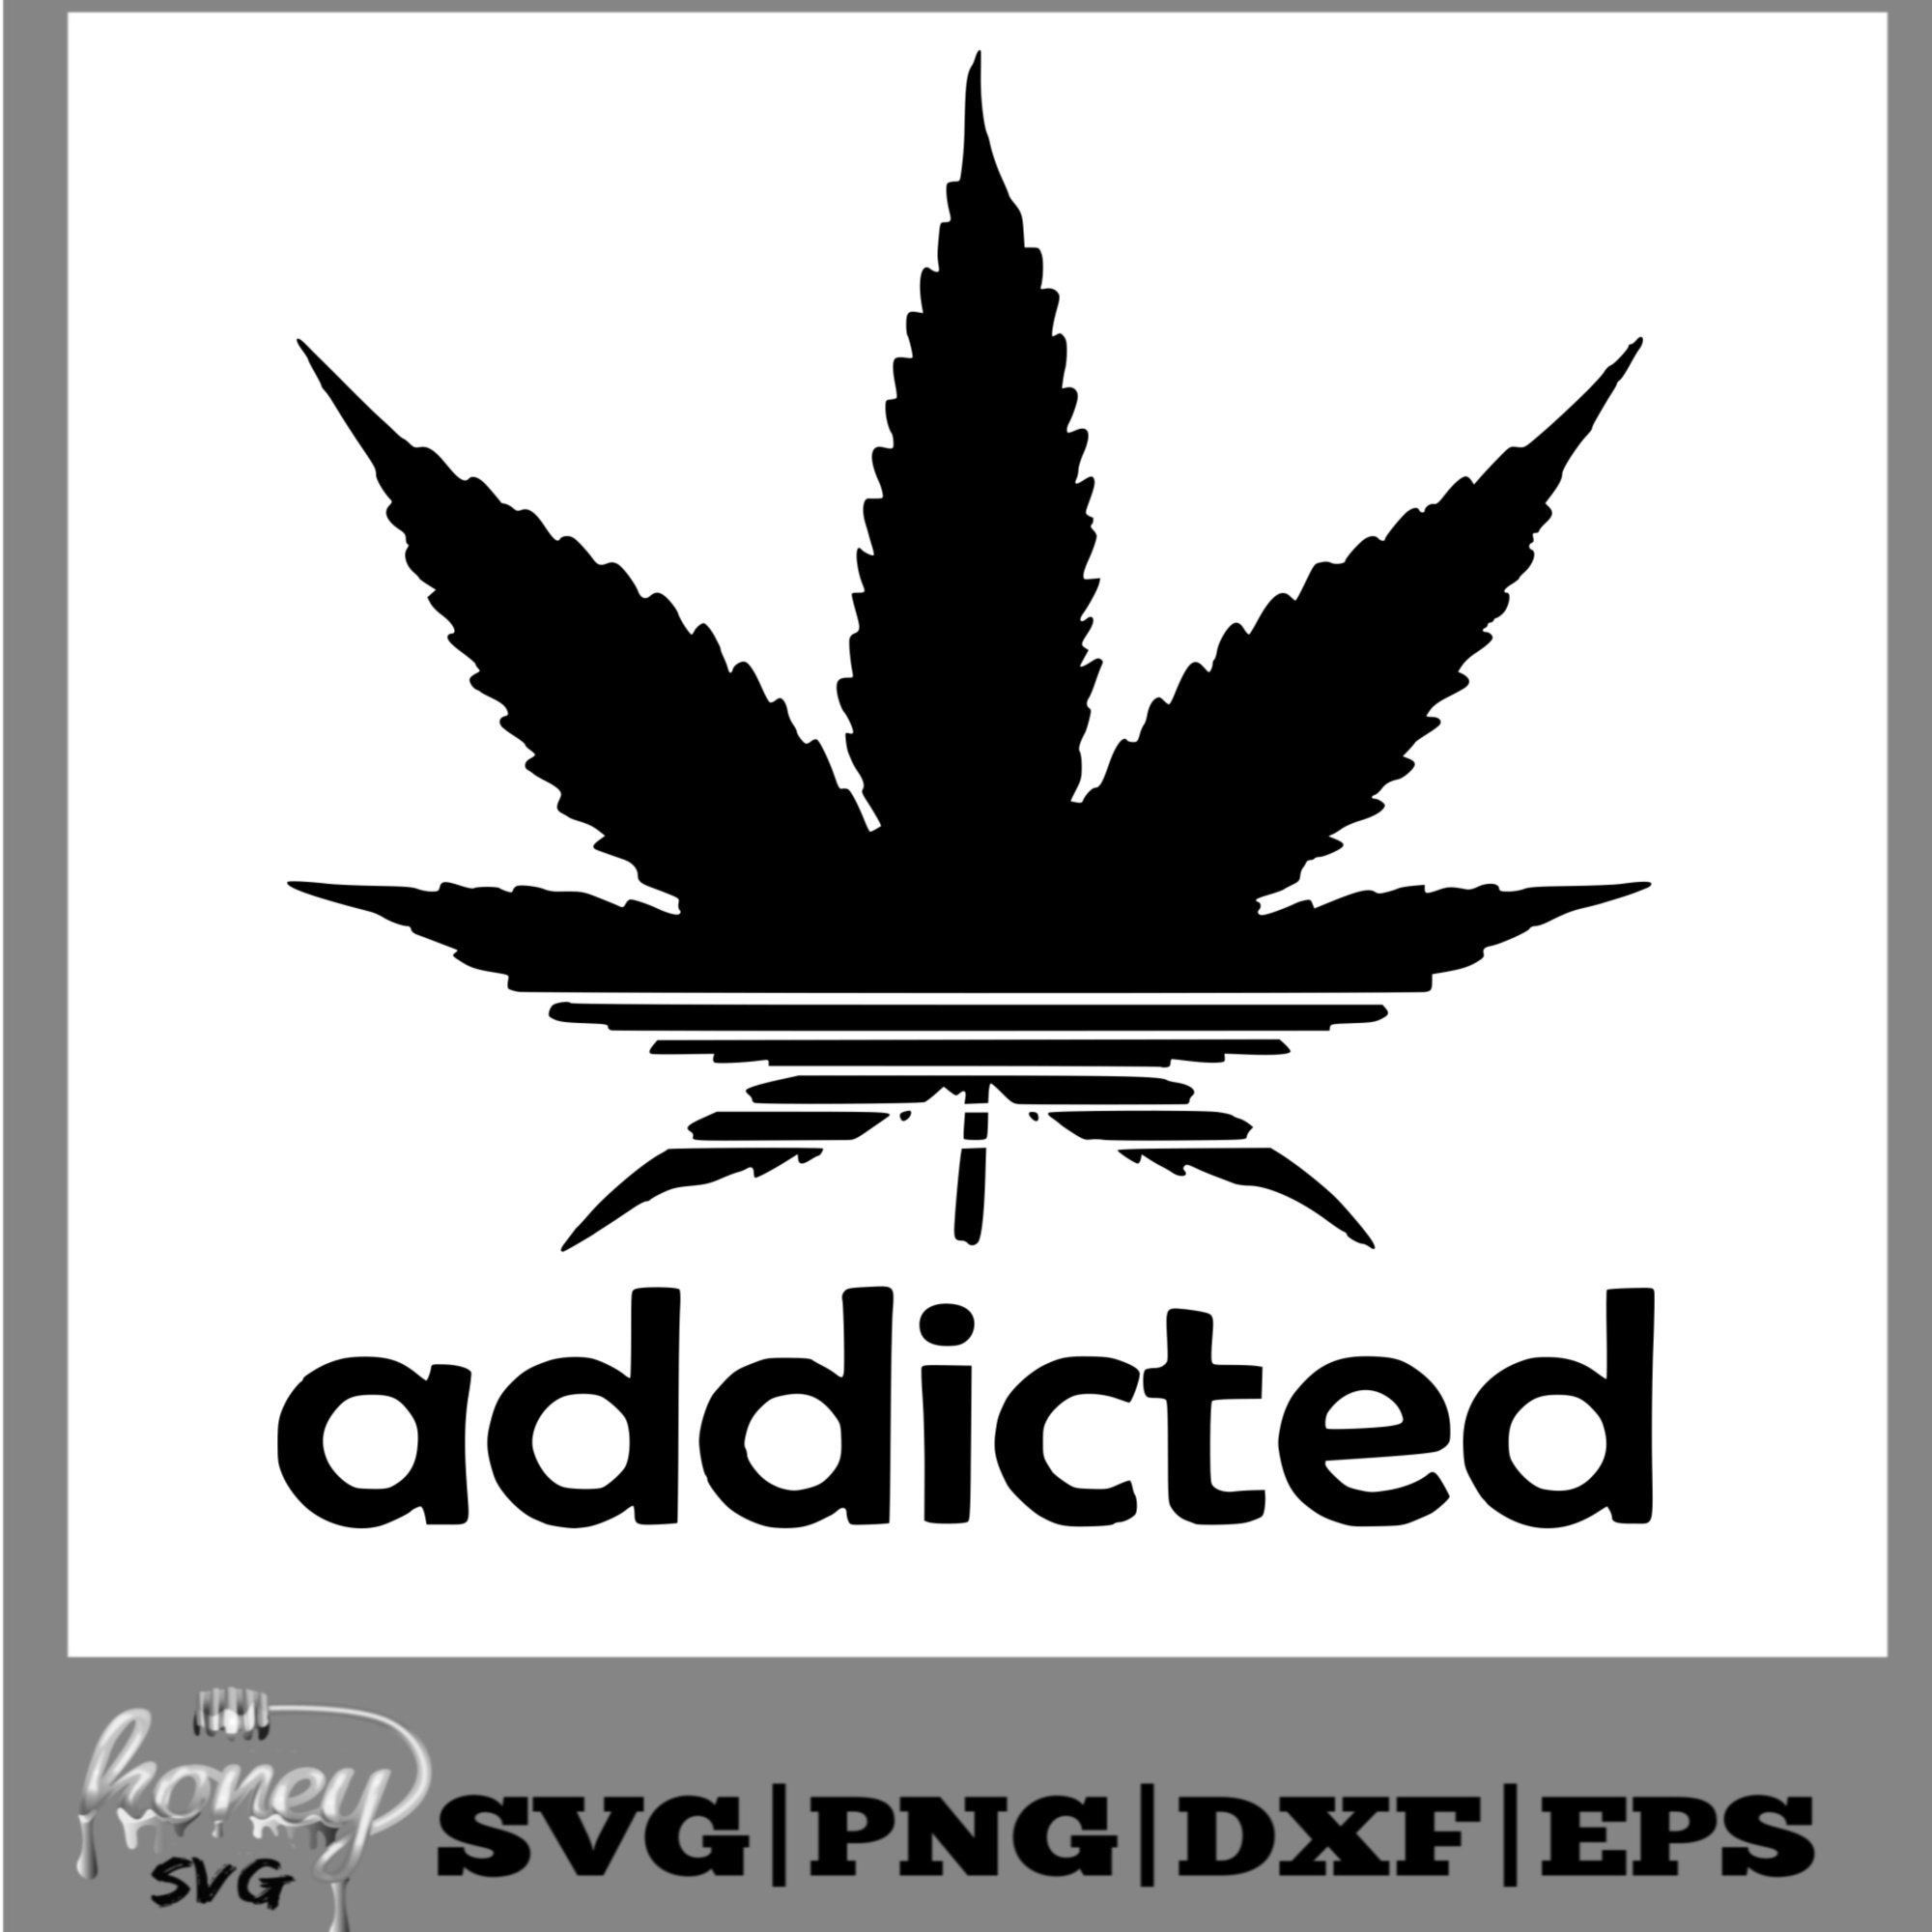 Weed Addicted Svg blunt File Blunt Weed Tray Png File Etsy Canada. 